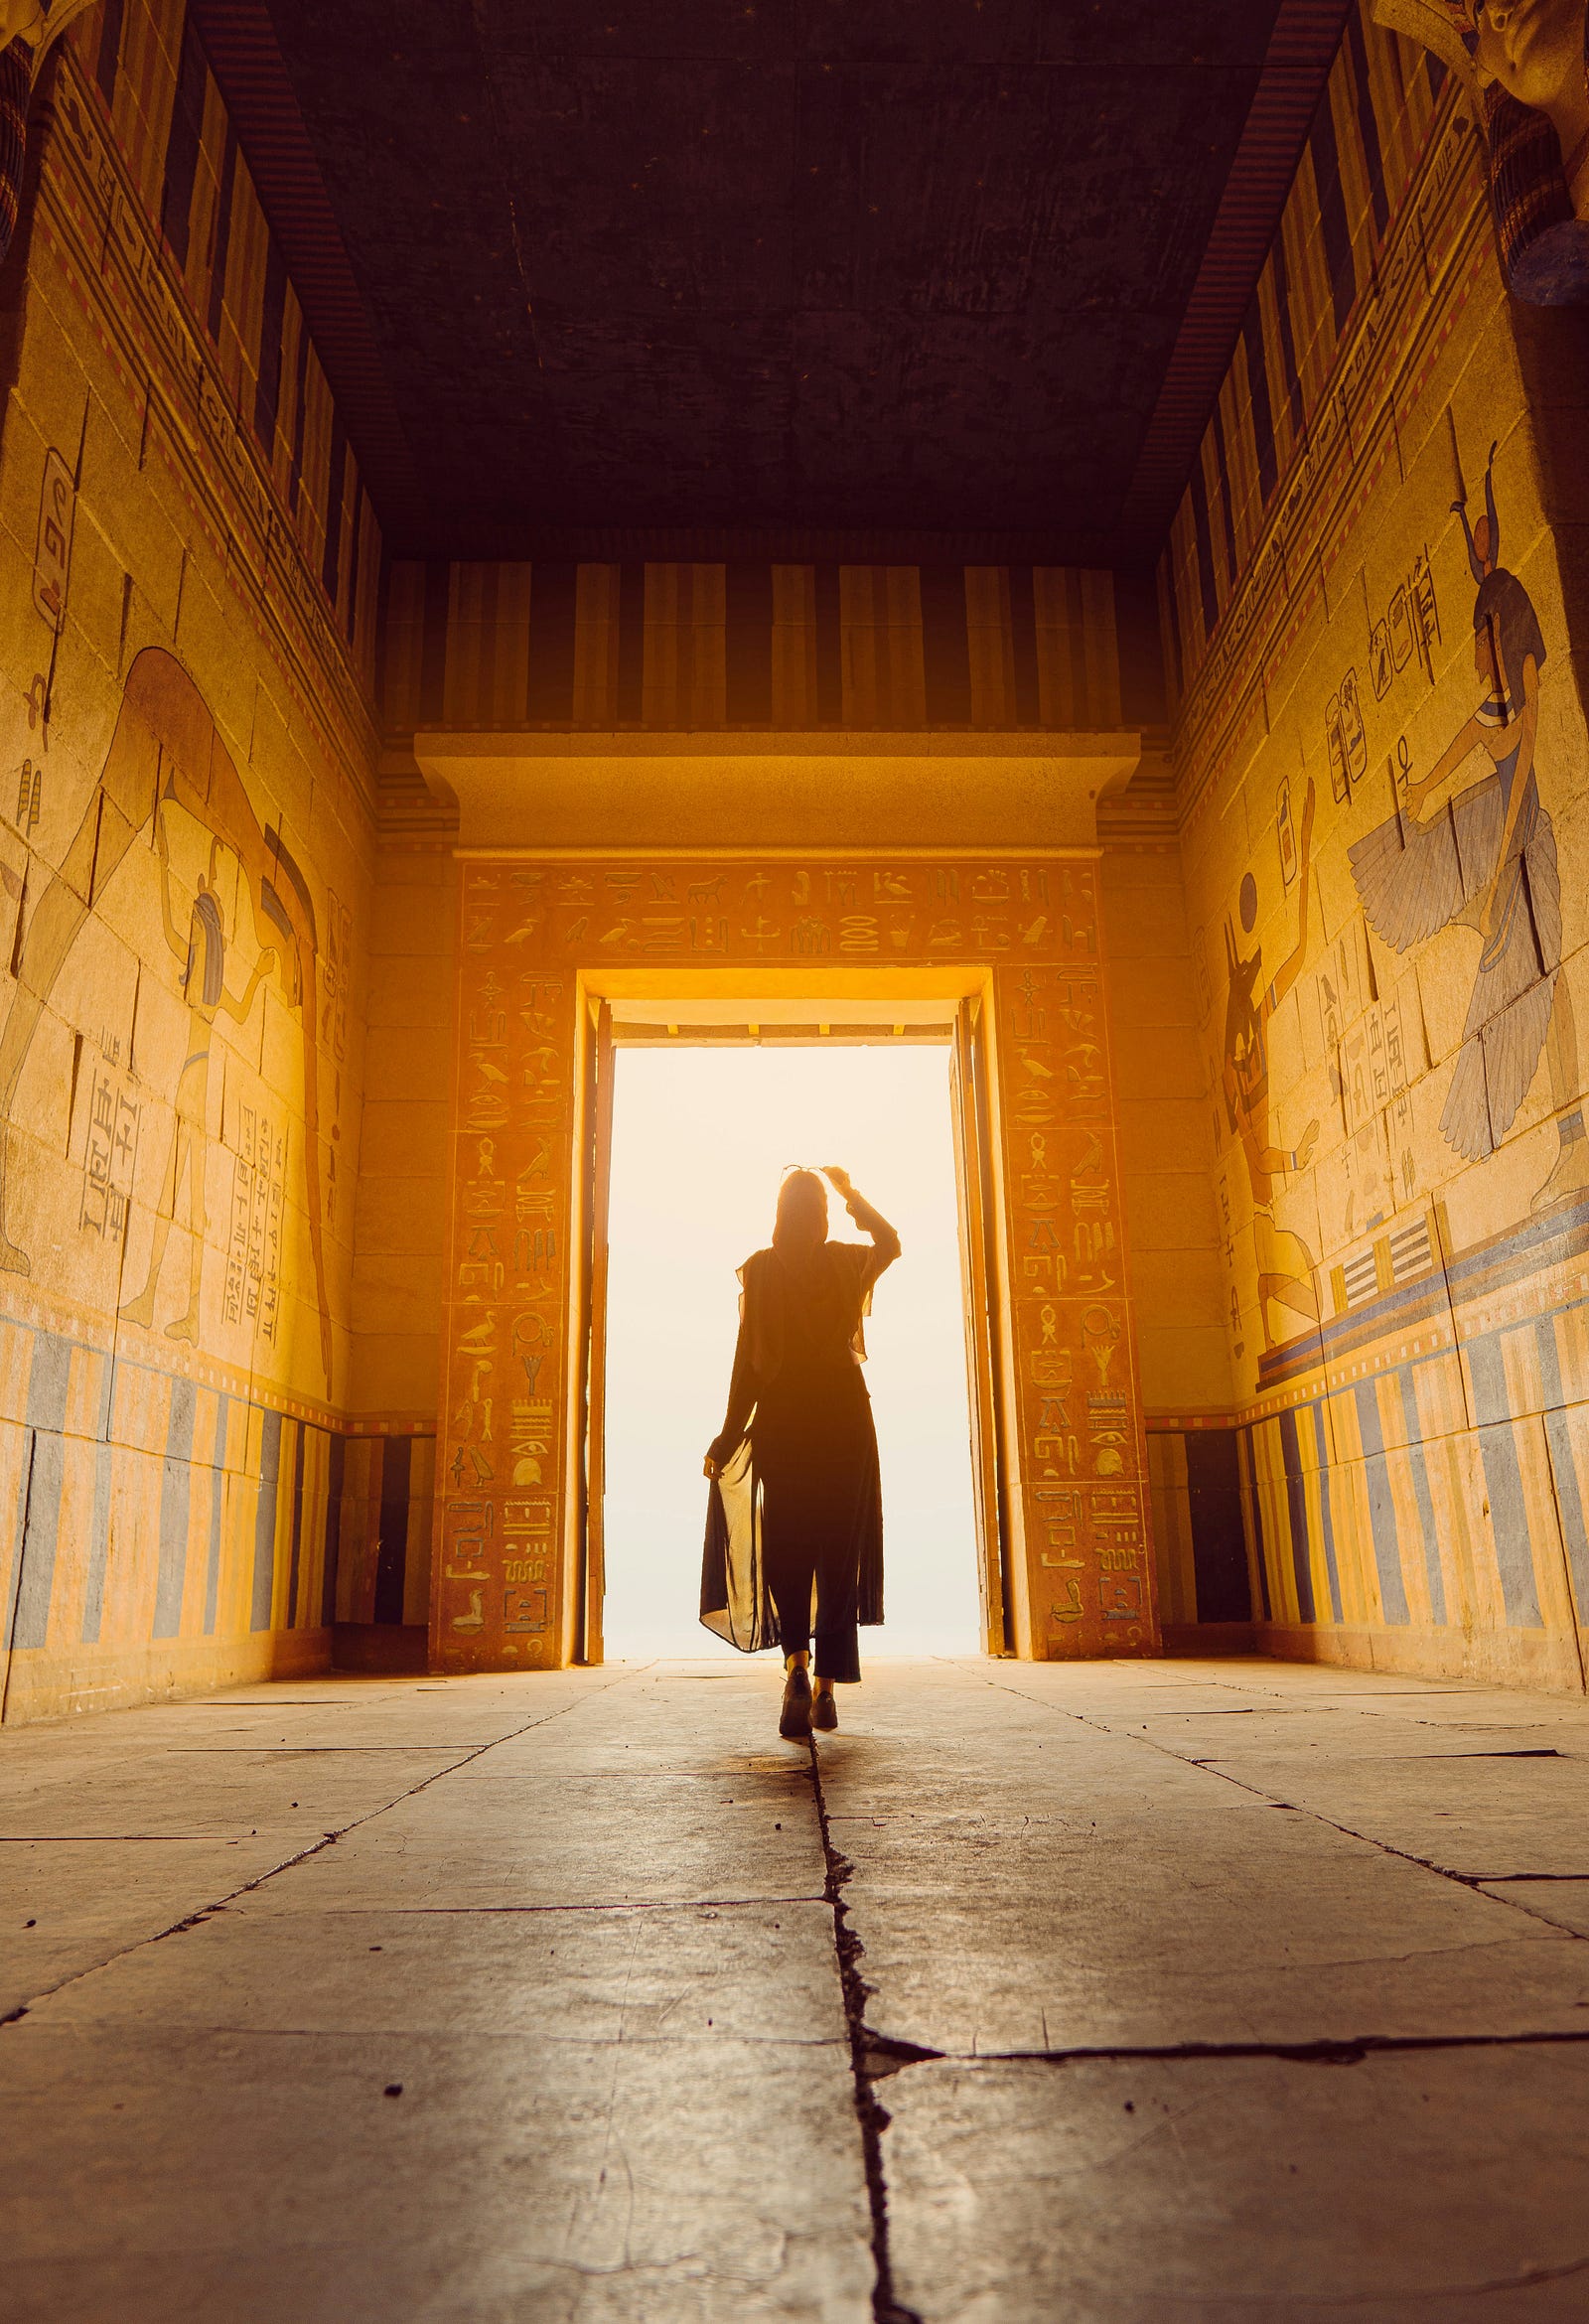 A woman walks away from us, towards the exit door of an ancient Egyptian building.